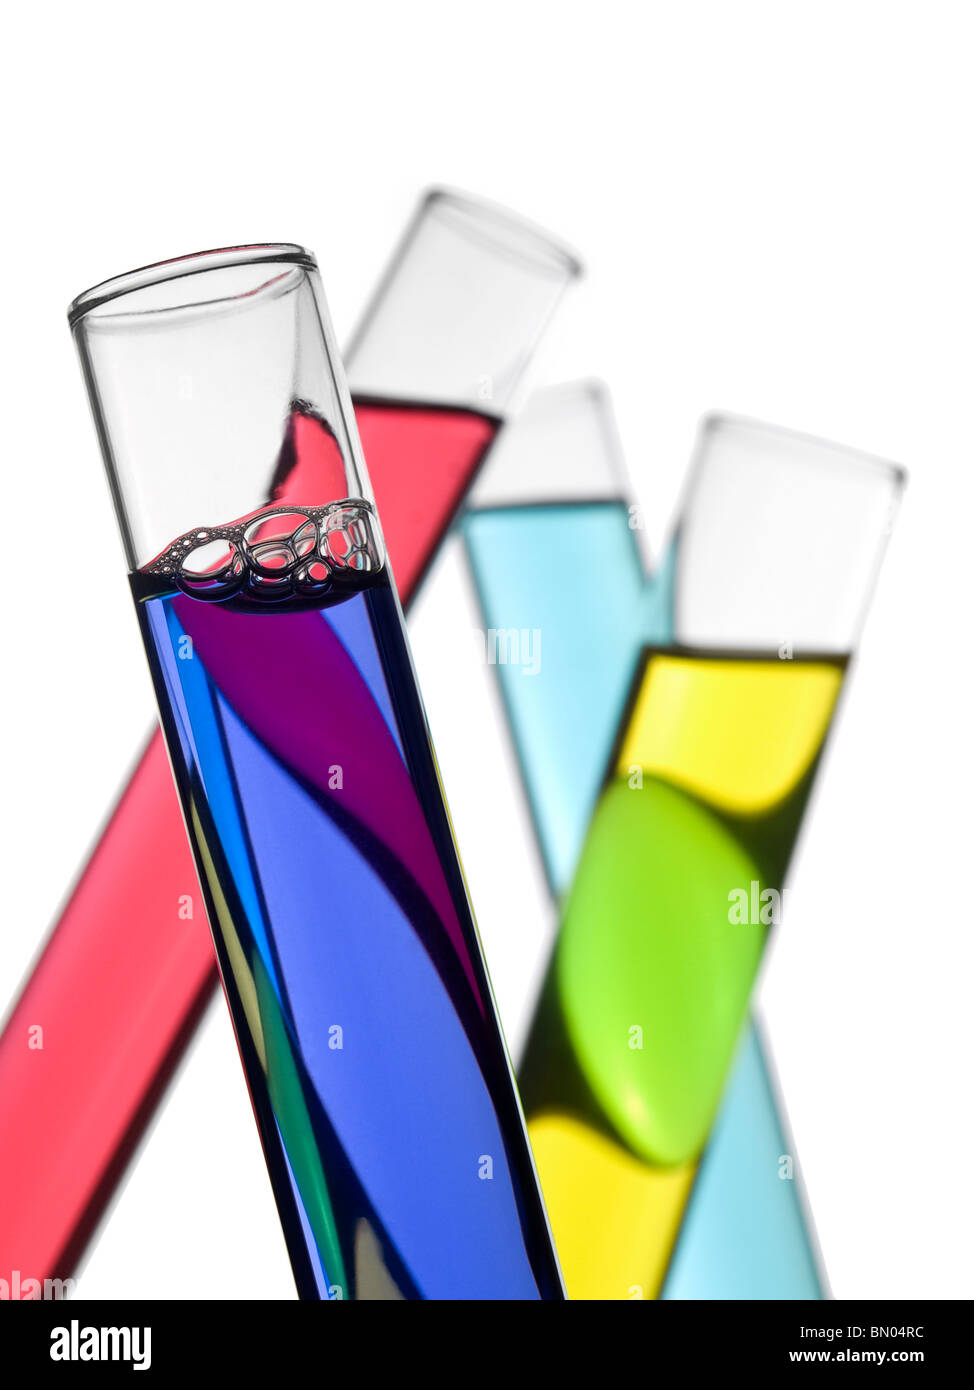 Four test tubes filled with colored liquids. Isolated on white. Stock Photo